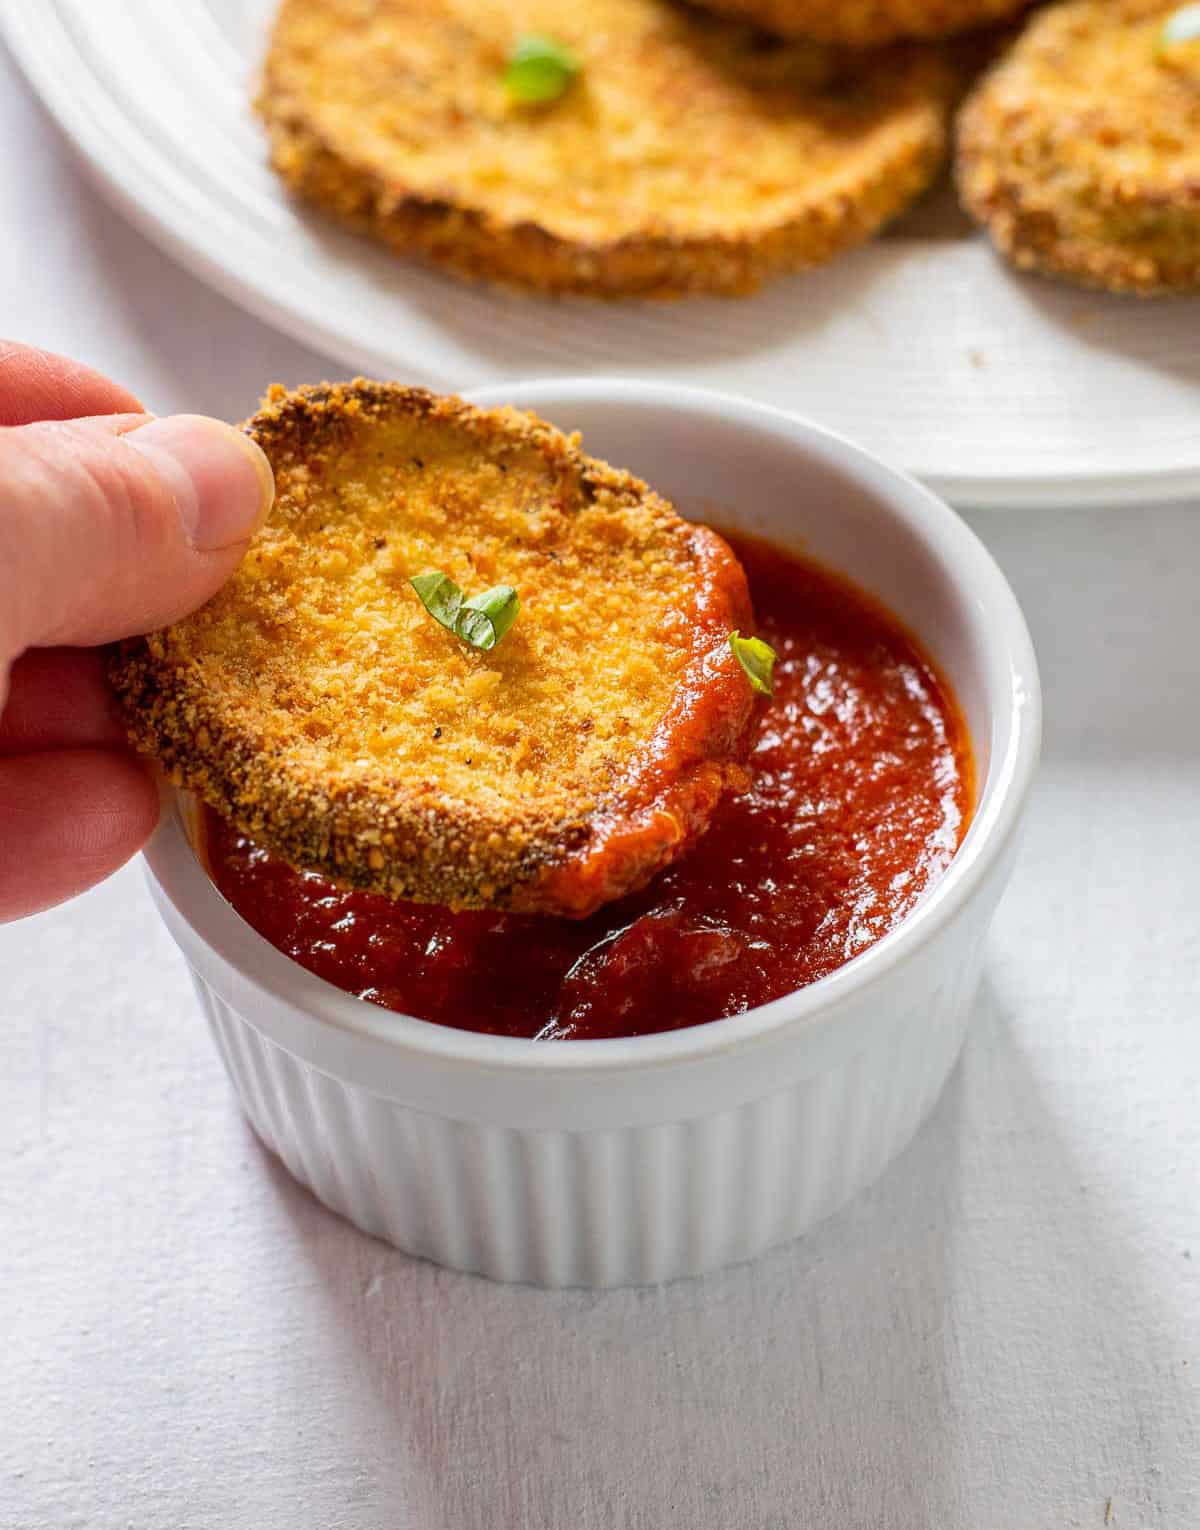 holding slice of breaded eggplant dipped in tomato sauce.